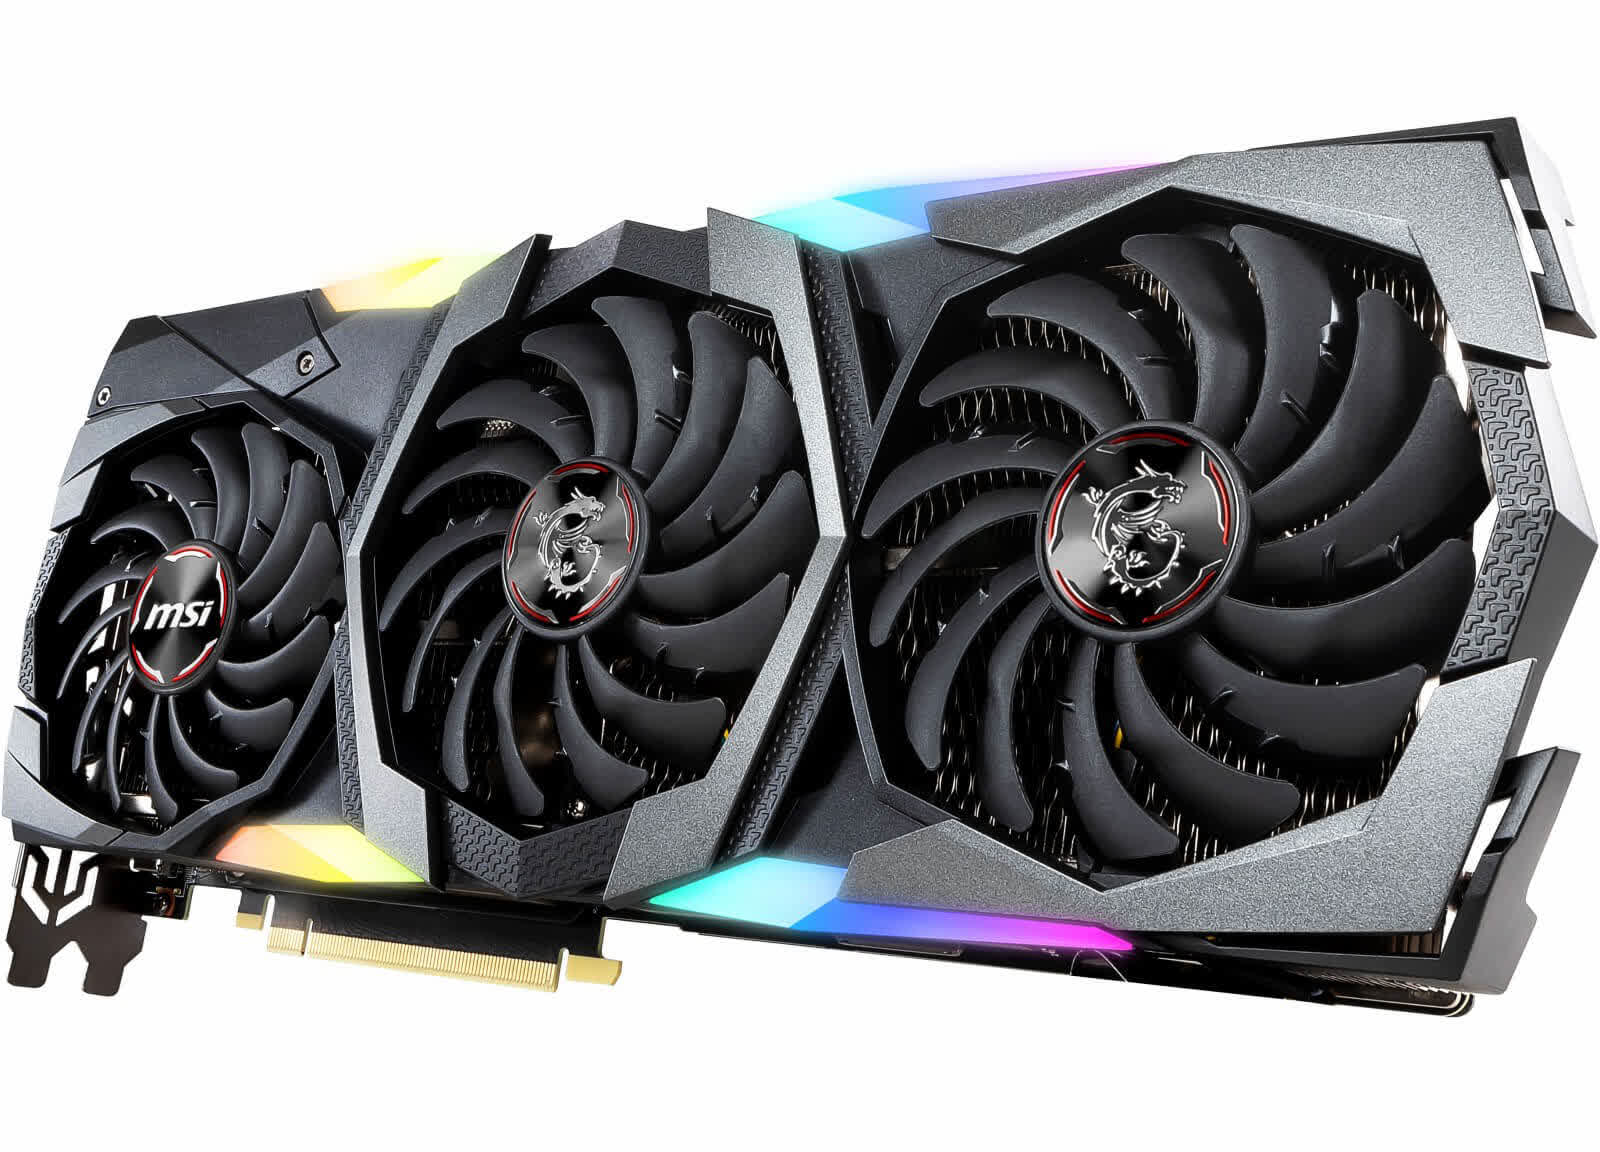 MSI GeForce RTX 2070 Super Gaming X Trio Reviews, Pros and Cons 